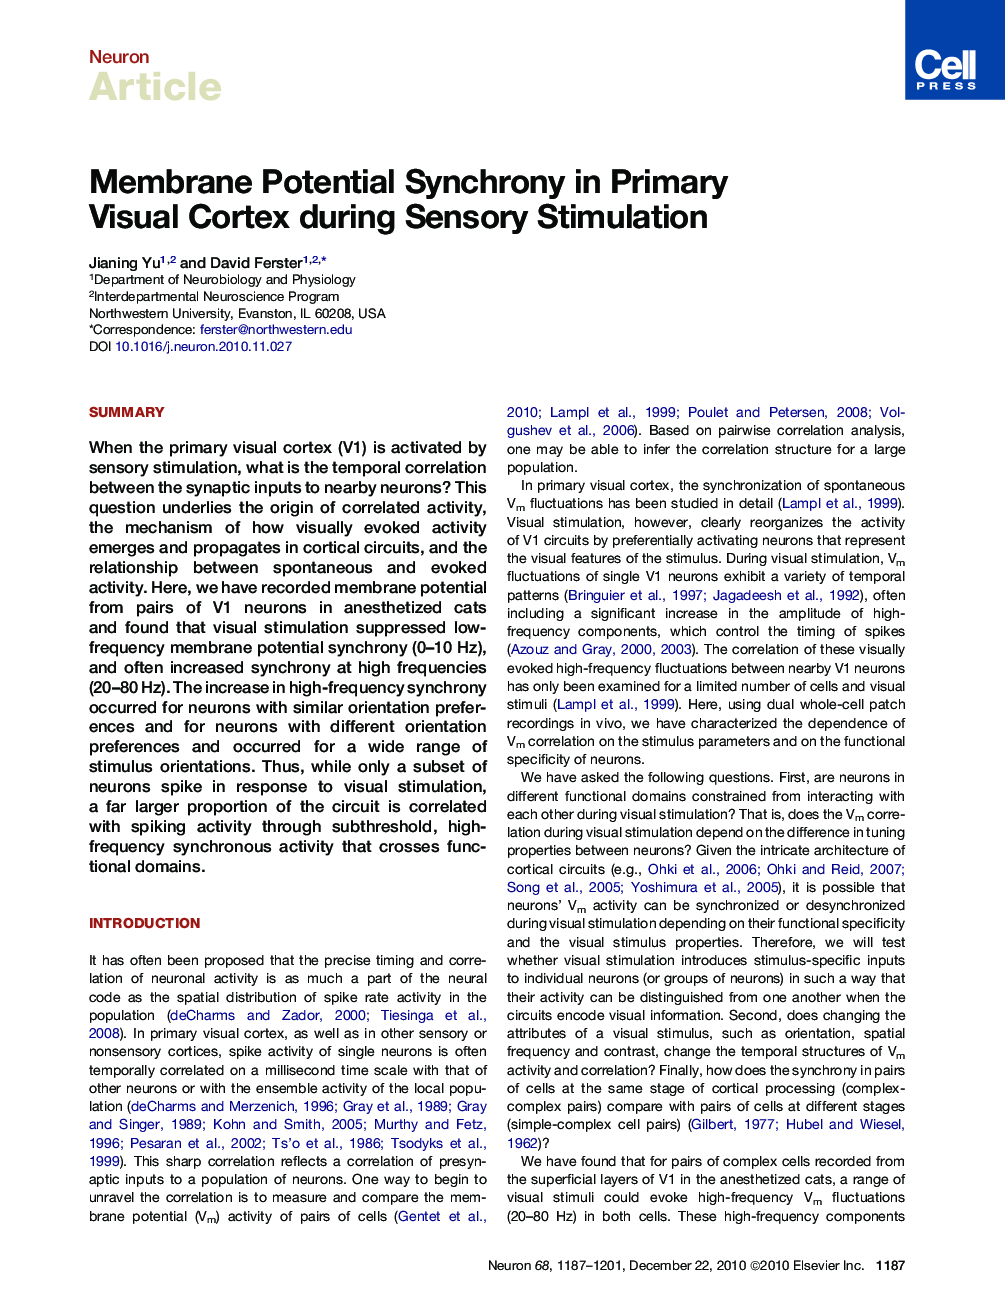 Membrane Potential Synchrony in Primary Visual Cortex during Sensory Stimulation